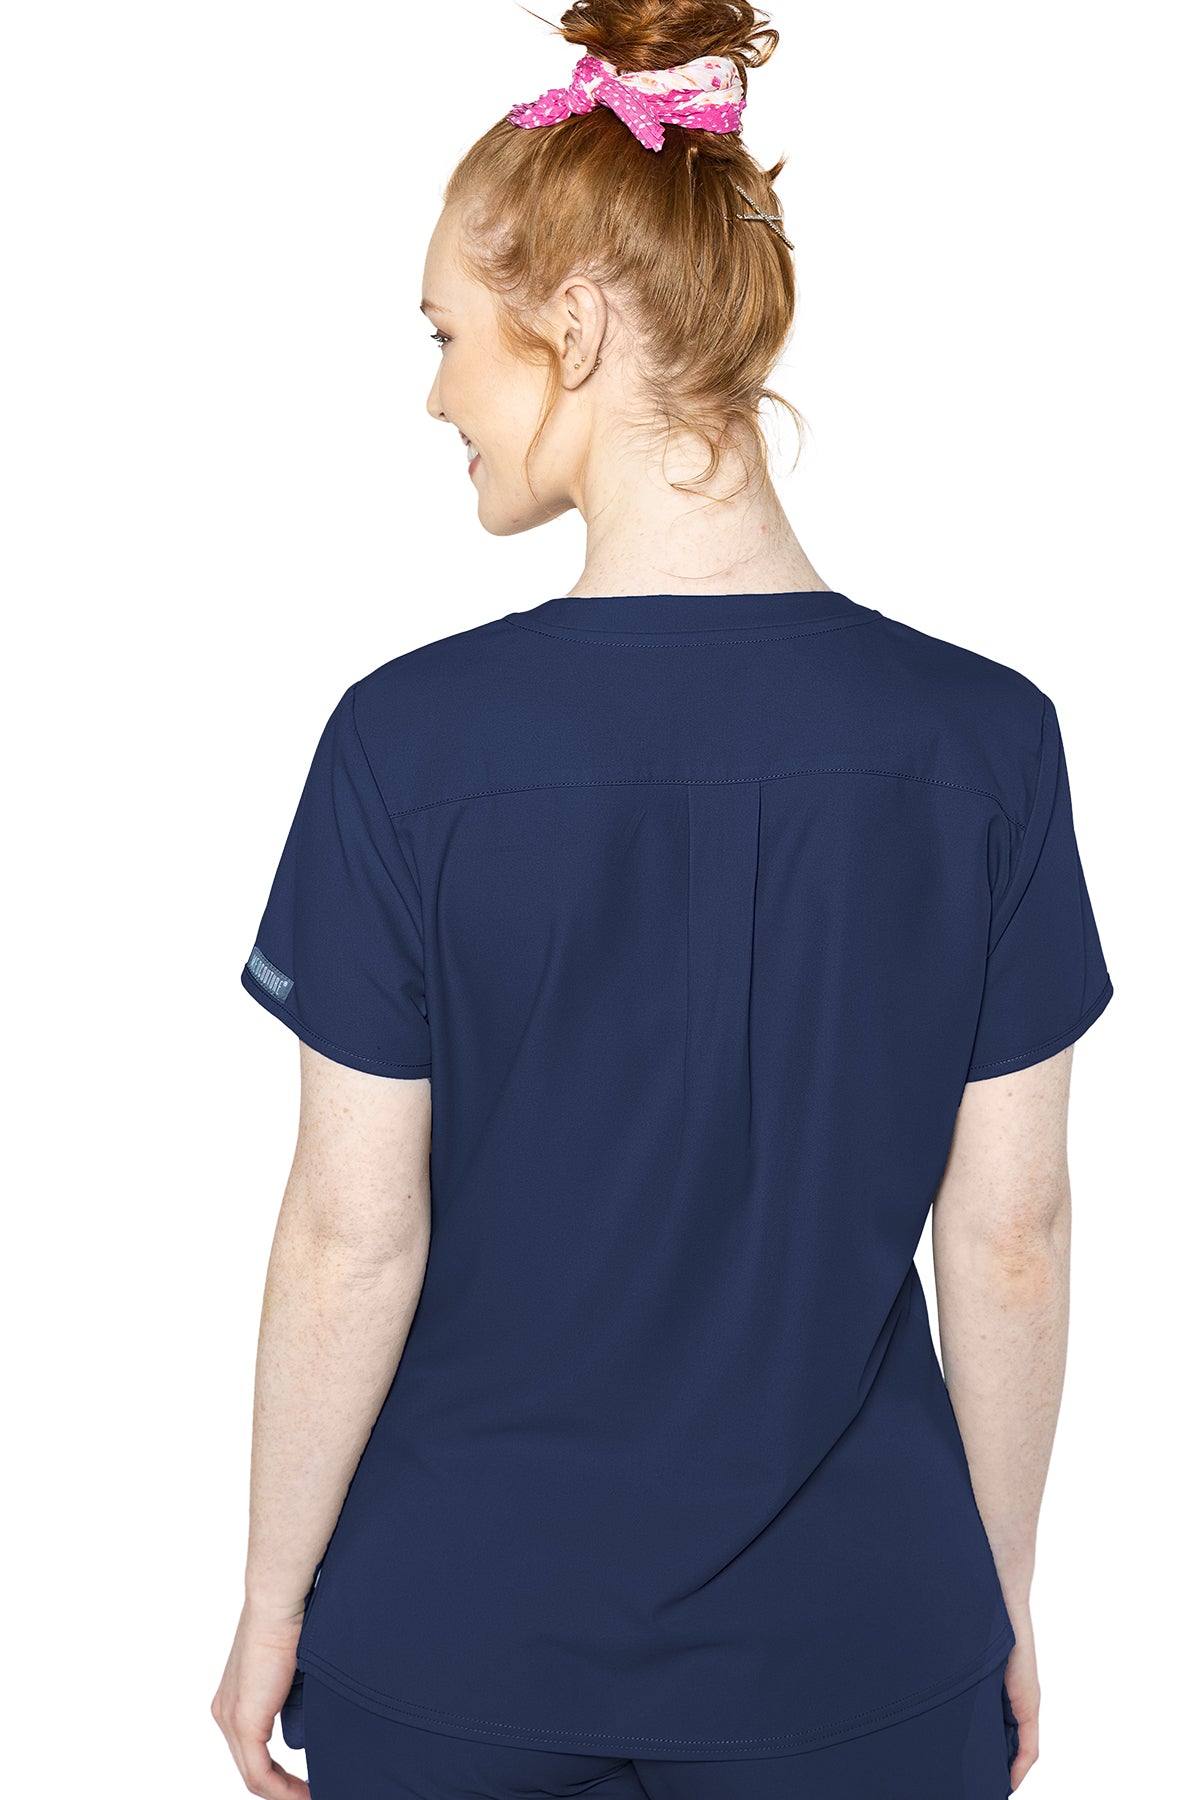 2411 Med Couture Insight 3 Pocket Scrub Top 